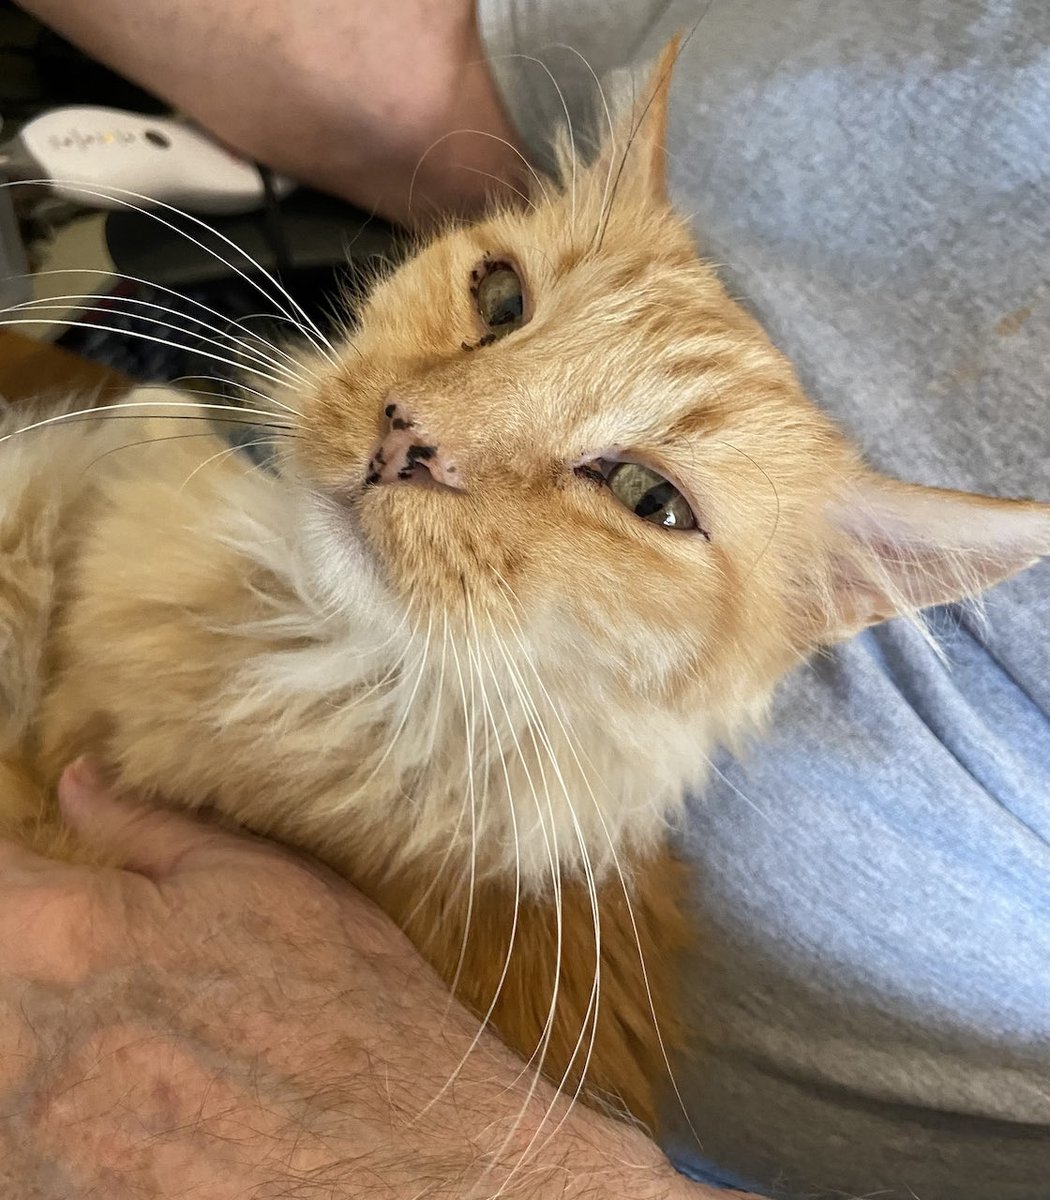 The Chief Cat Wrangler just posted a new entry on his blog at the Mandarin’s Retreat website mrhwc.org. Give it a look and learn about our newest resident Linus, a senior cat.